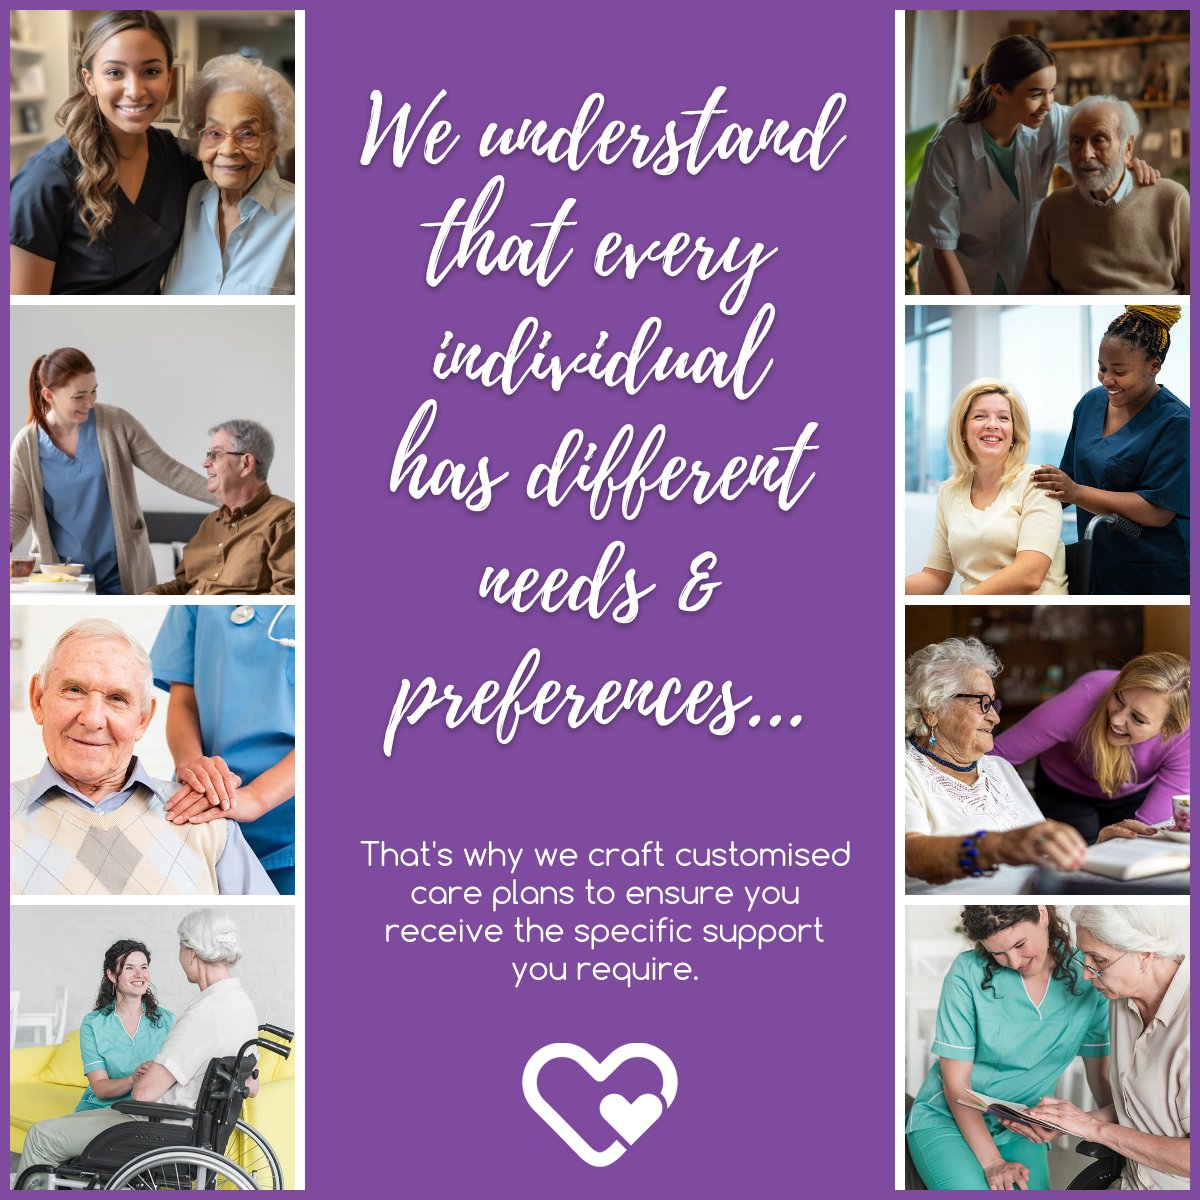 ✨ Why Choose JPH? ✨Personalised Care Plans: We understand that every individual has different needs and preferences. That's why we craft customised care plans to ensure you receive the specific support you require. #personalisedcare #socialcare #weareJPH #homecare #weareJPH